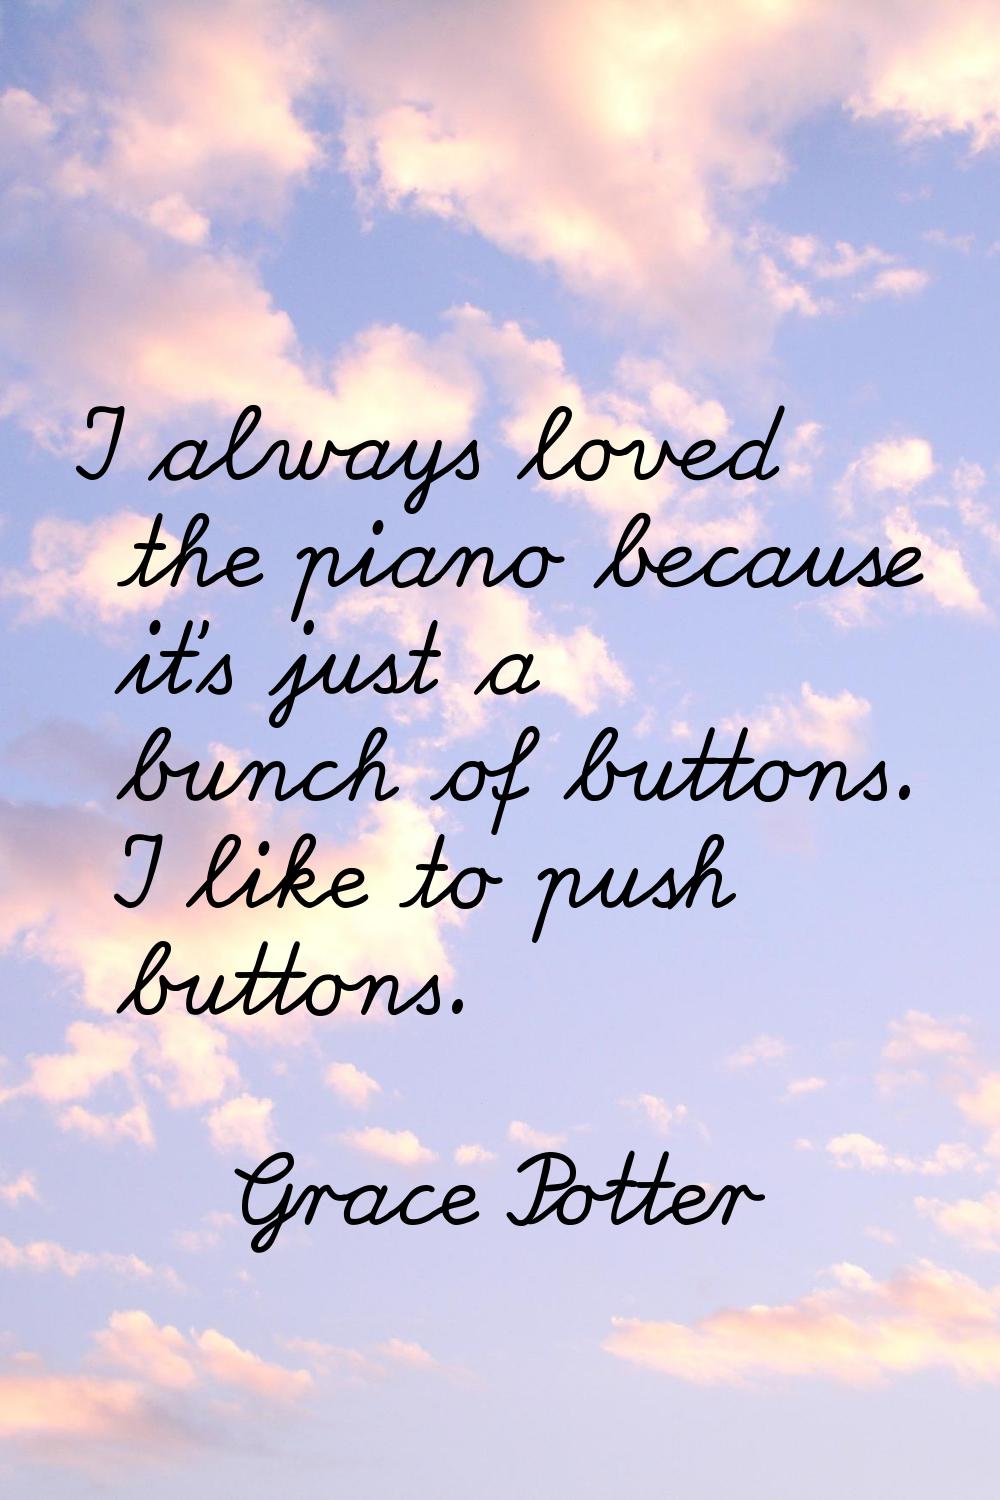 I always loved the piano because it's just a bunch of buttons. I like to push buttons.